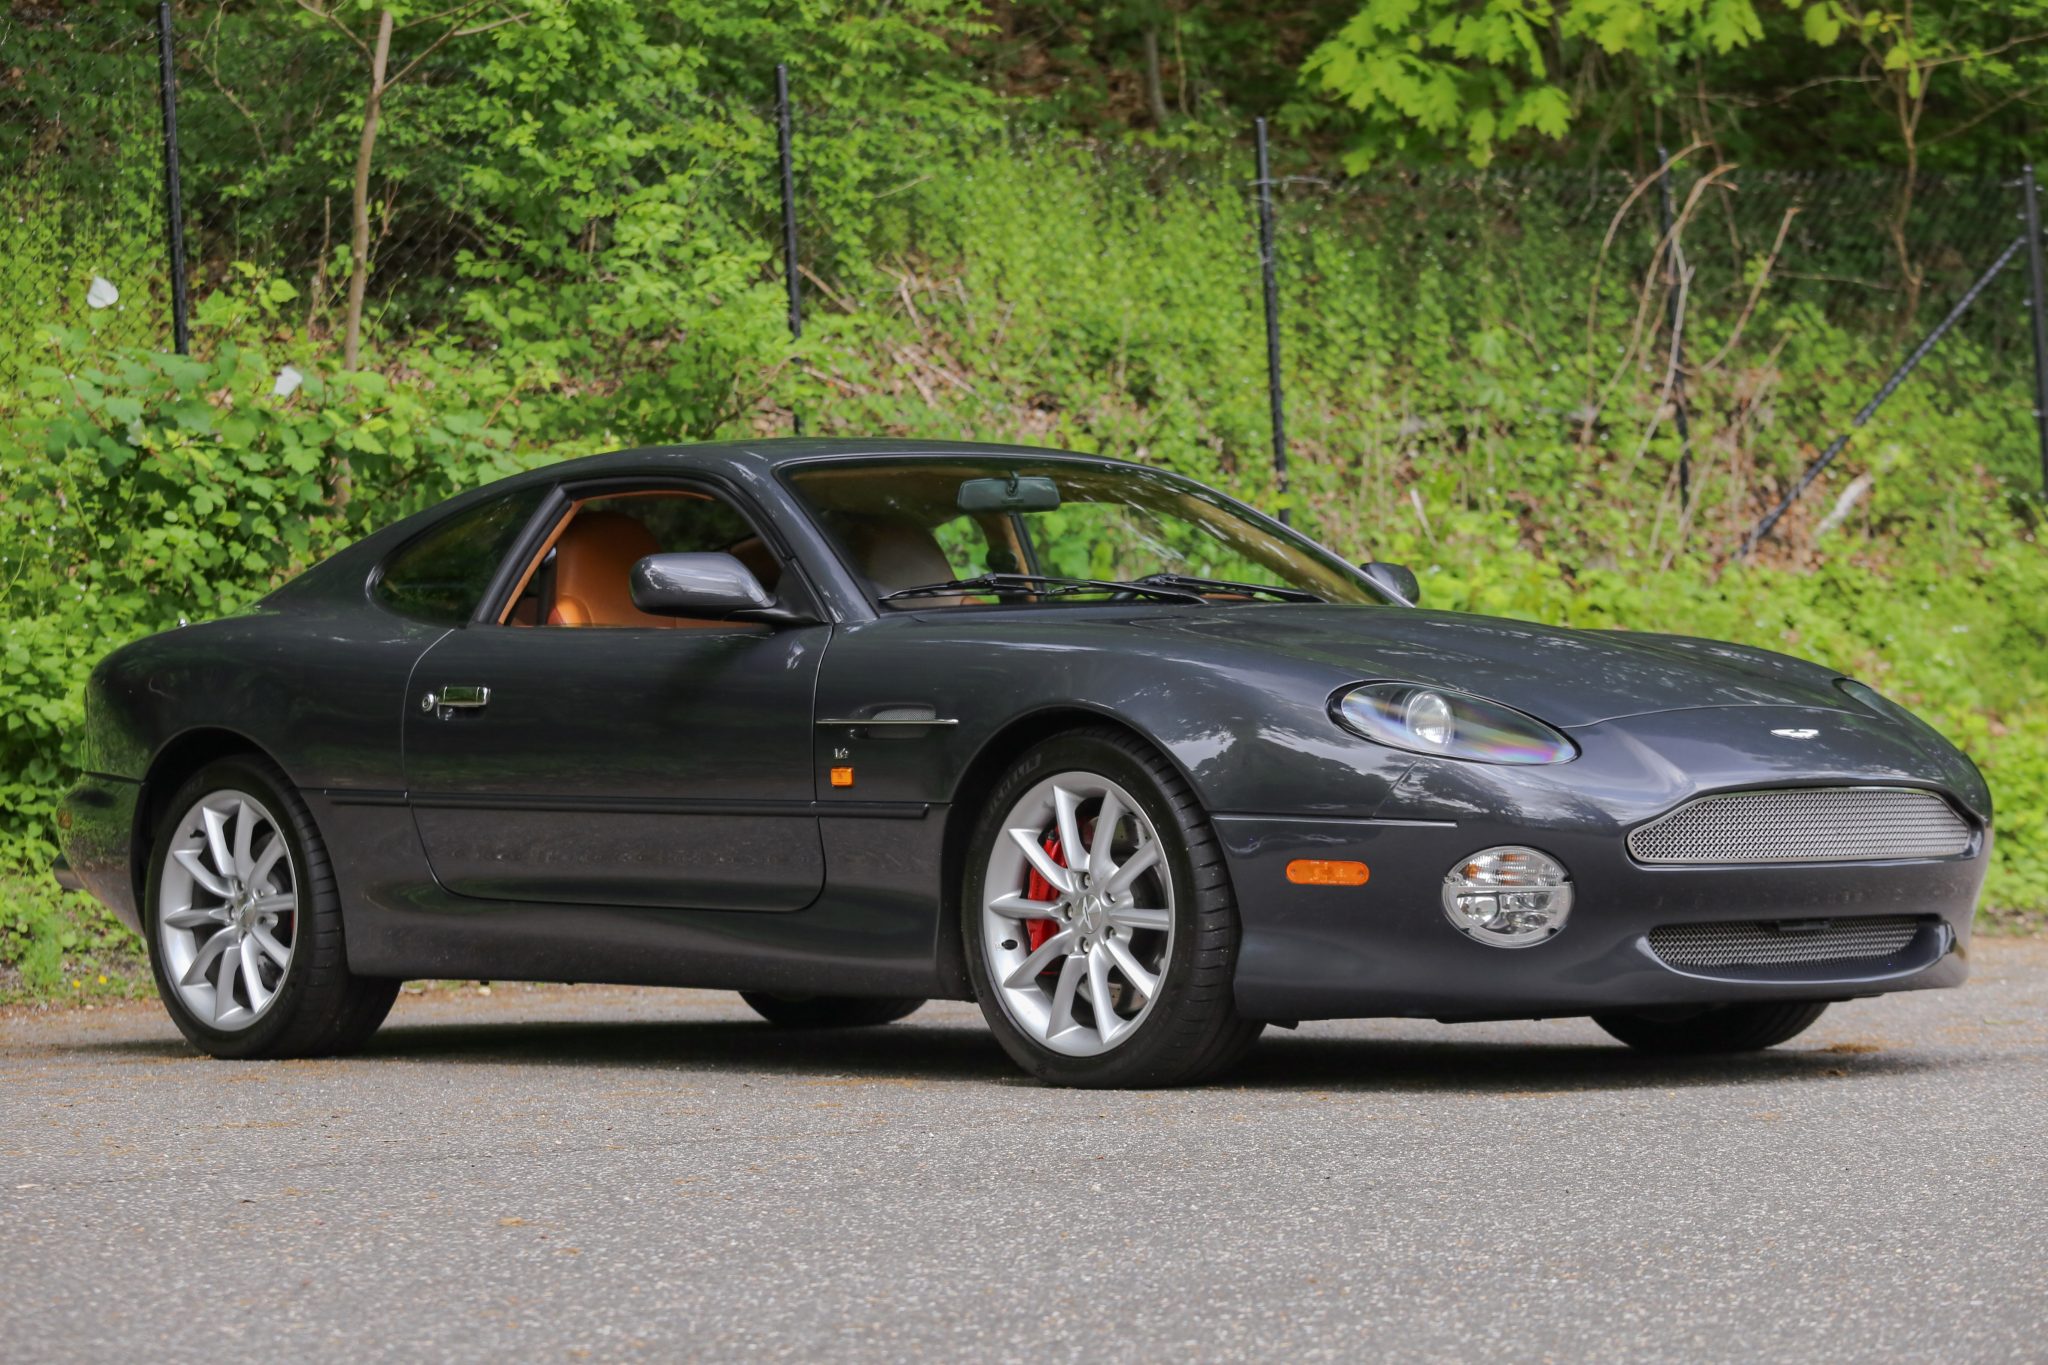 Used 23k-Mile 2003 Aston Martin DB7 V12 Vantage Coupe 6-Speed Review